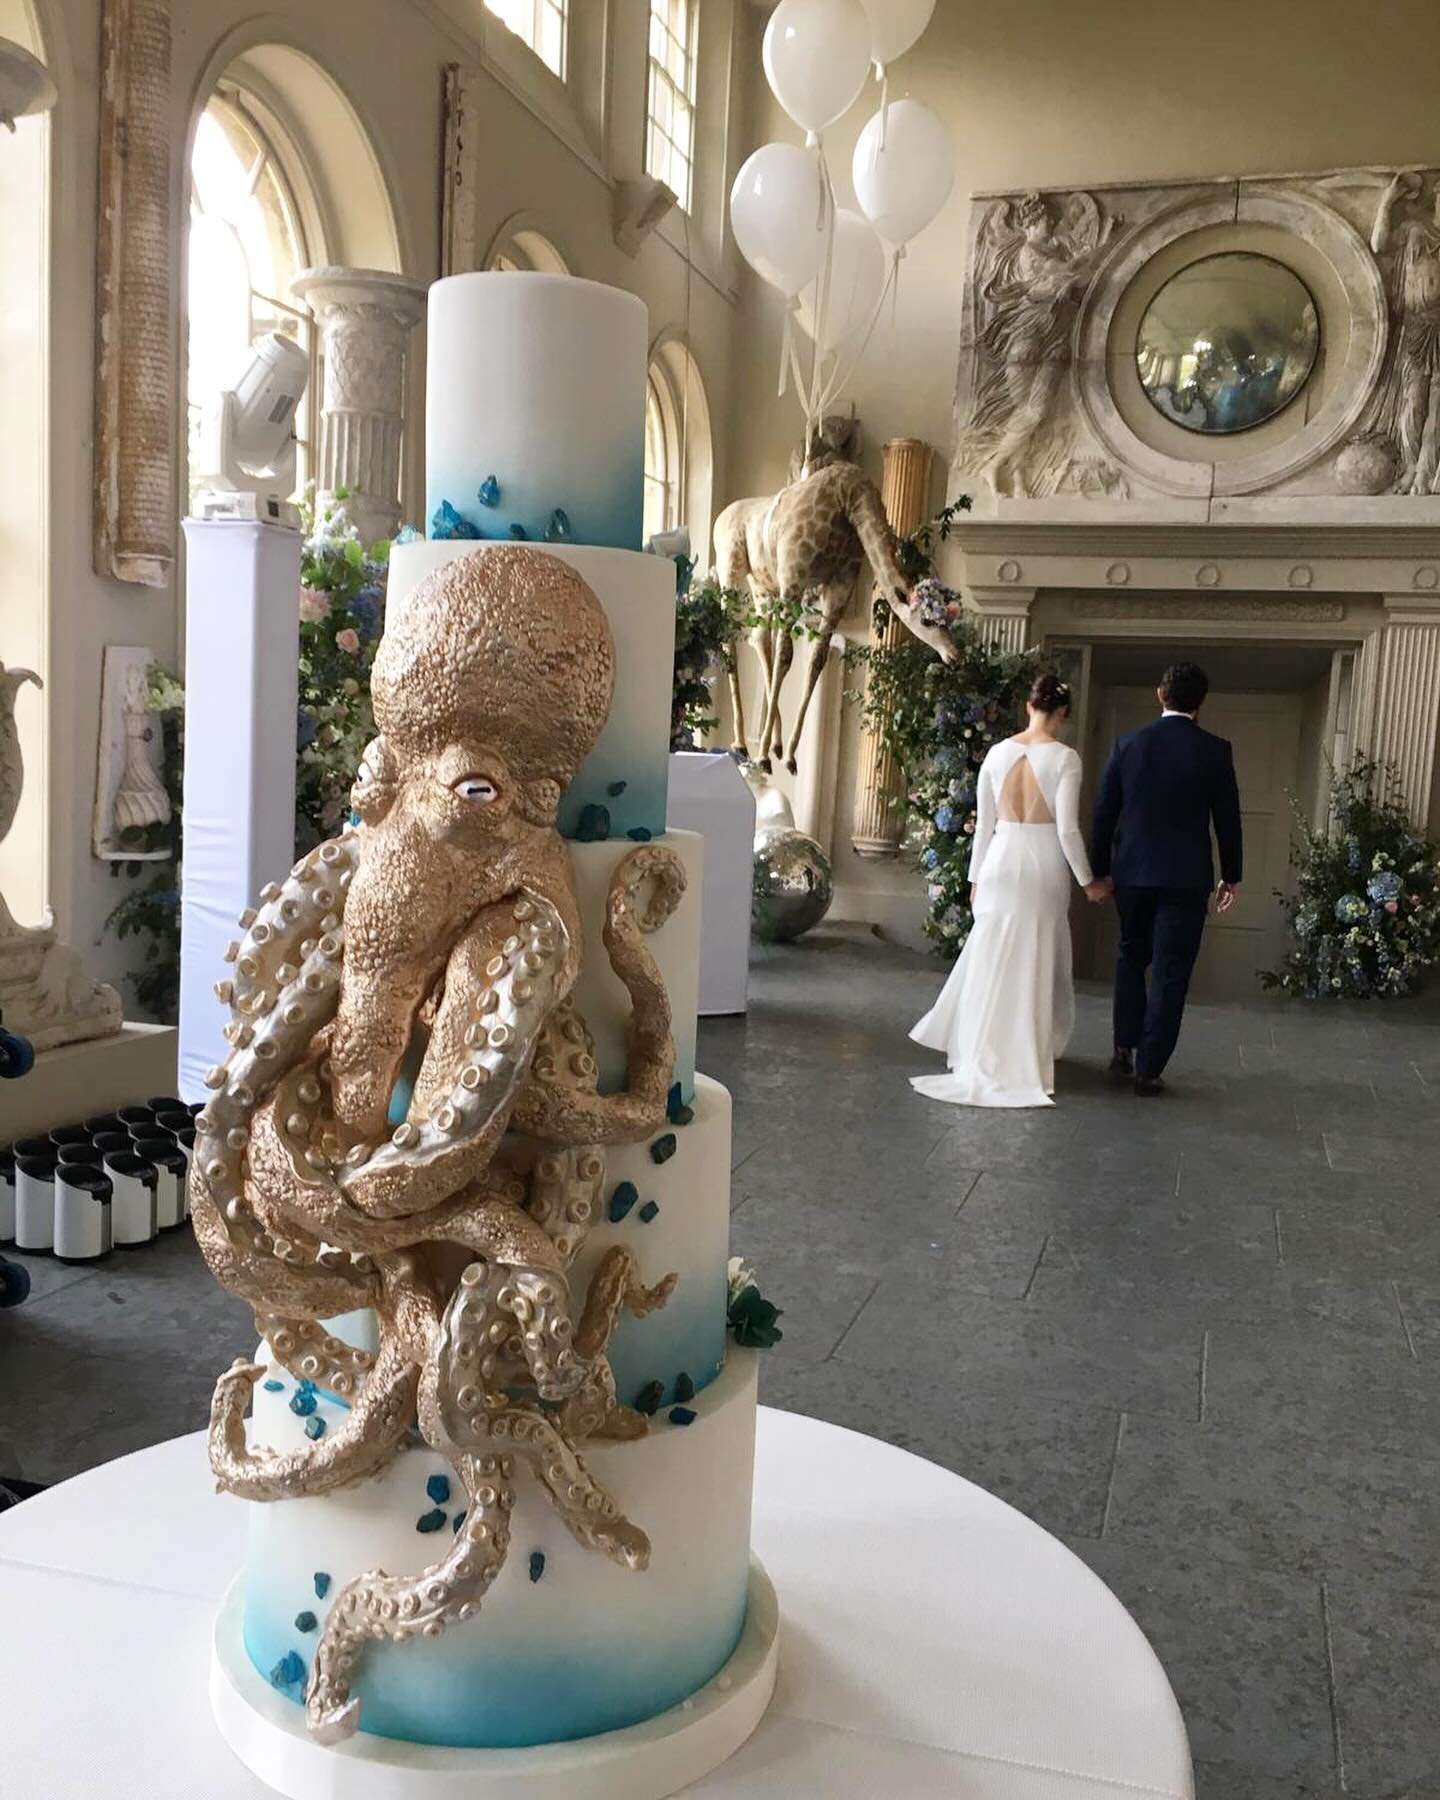 We really do love an unusual wedding cake, and this one matched perfectly with the setting @aynhoepark.

Thank you @thebijoustudio for the fun brief! 🐙🩵

.
#cake #cakeart #weddingcake #wedding #alternativewedding #sculpturalcake #sculpturecake #lux